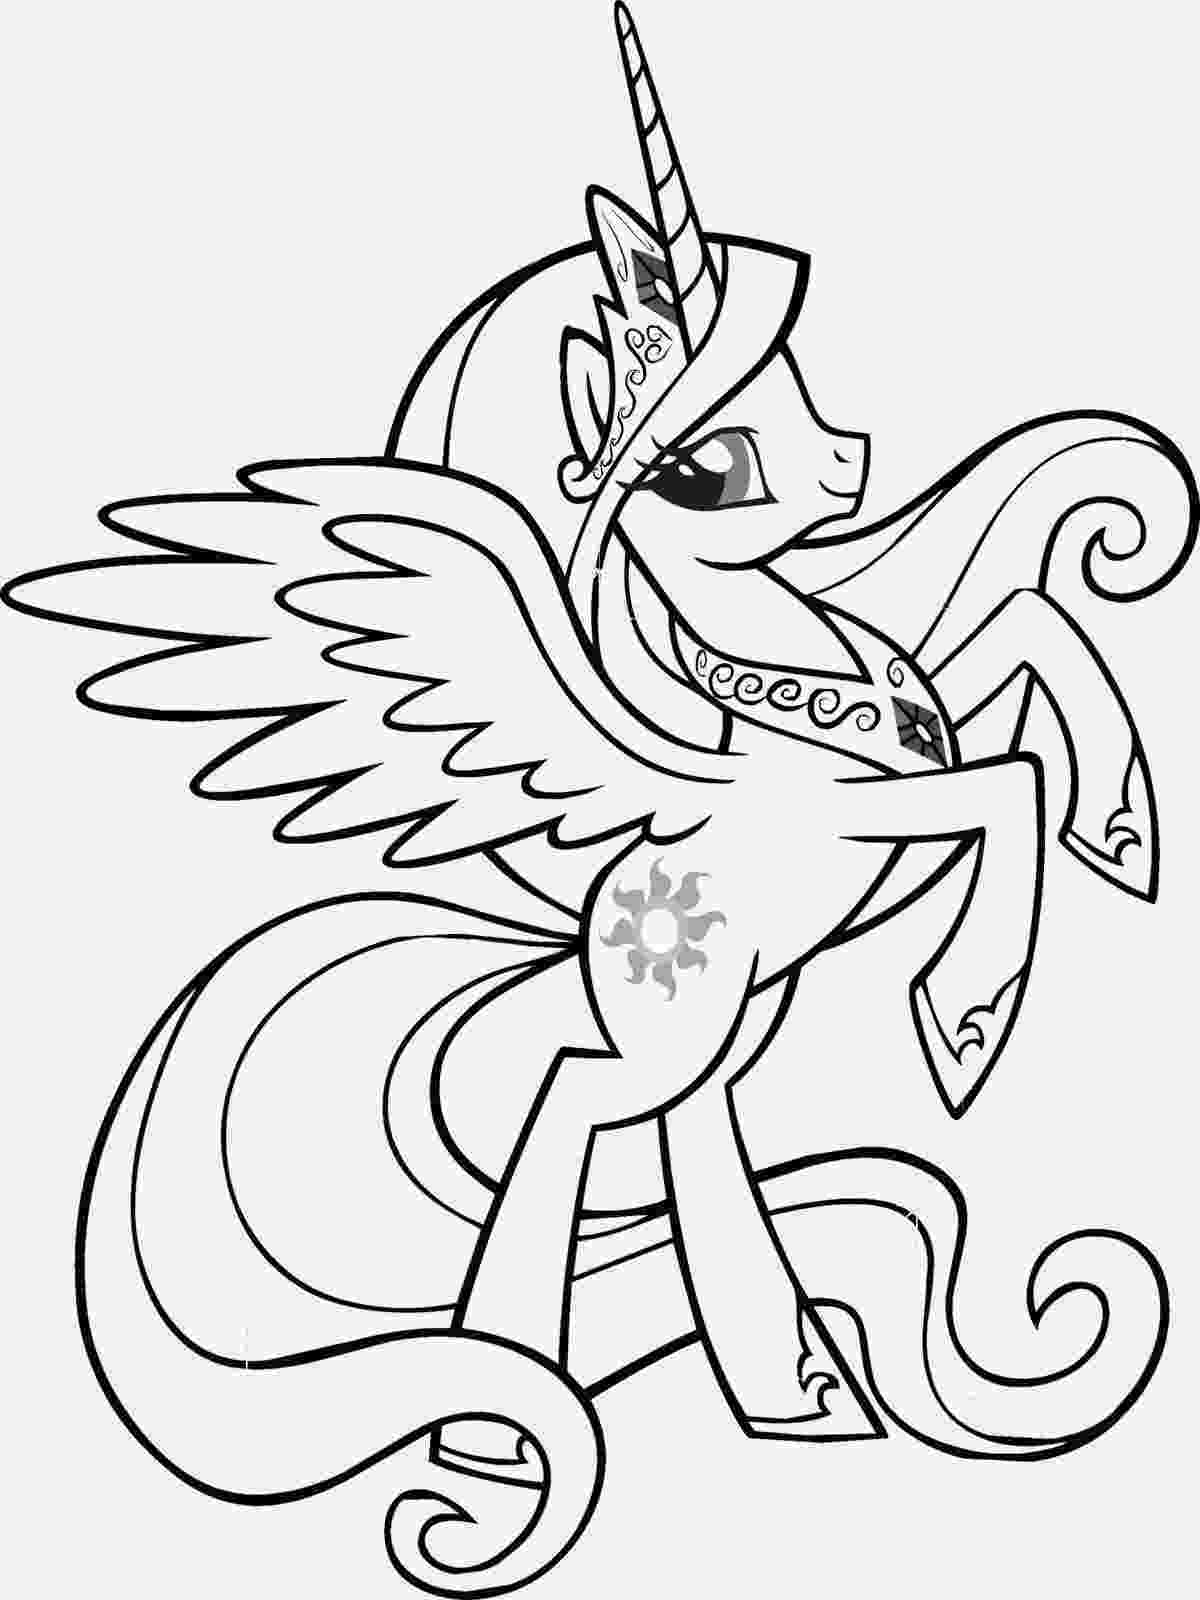 unicorns coloring pages unicorn coloring pages to download and print for free coloring pages unicorns 1 1